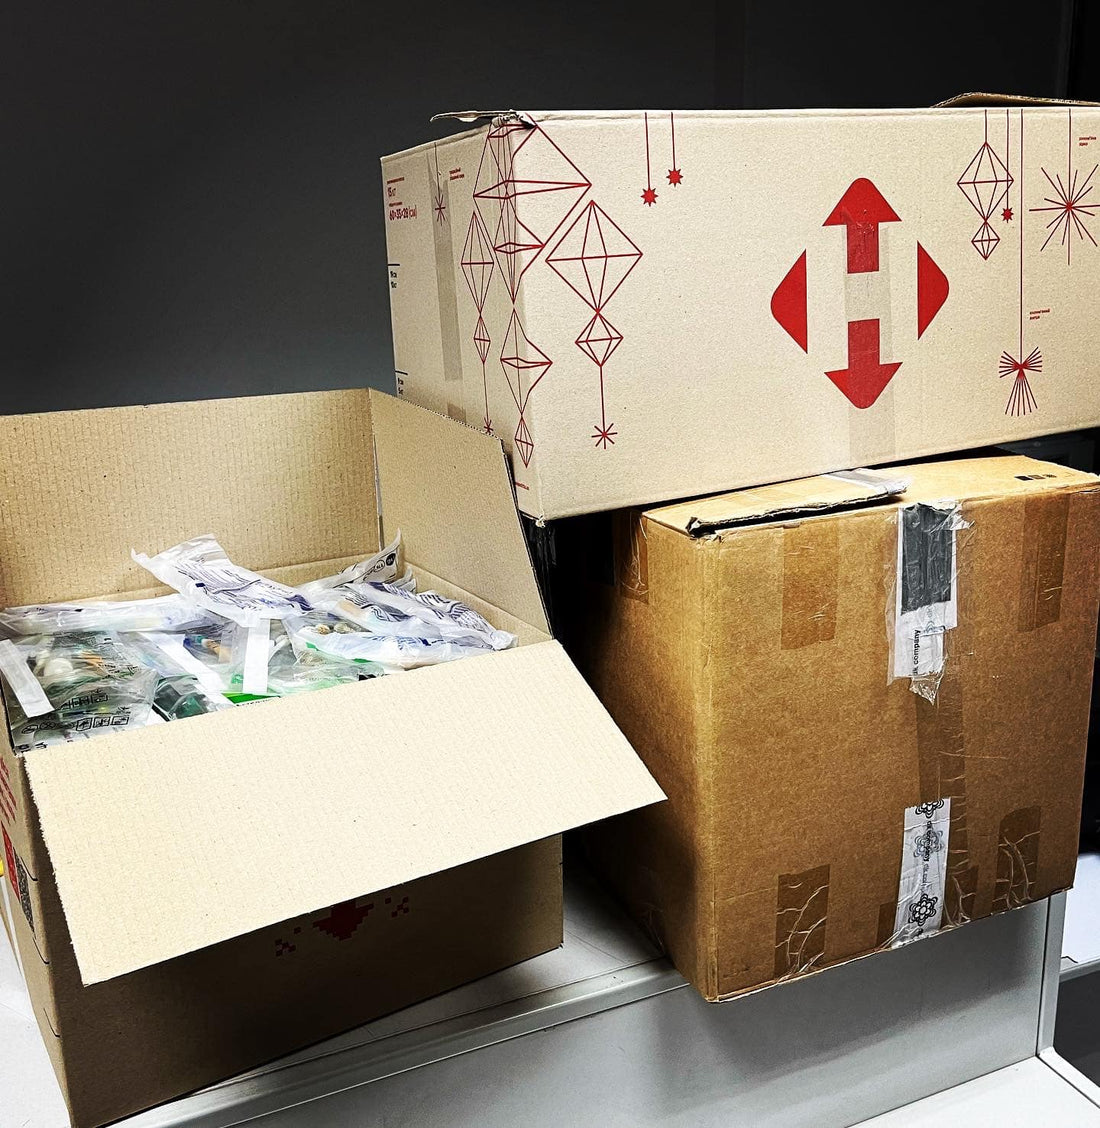 Black Maple Company ships out medical supplies to field hospitals